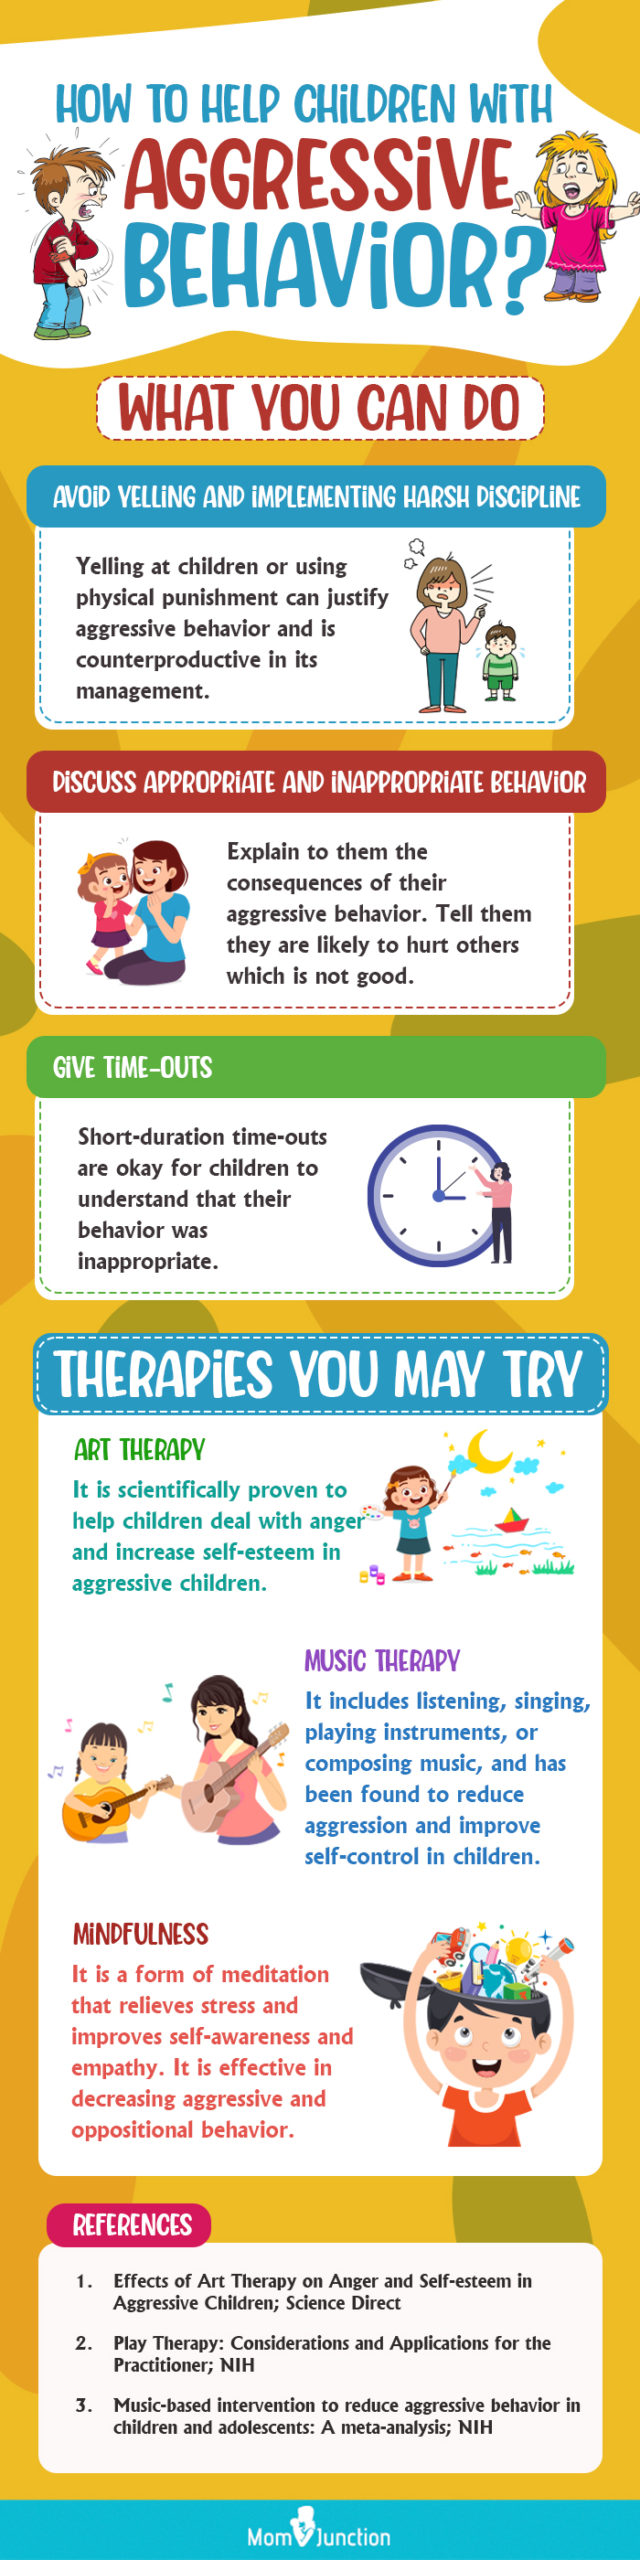 how to help children with aggressive behavior (infographic)